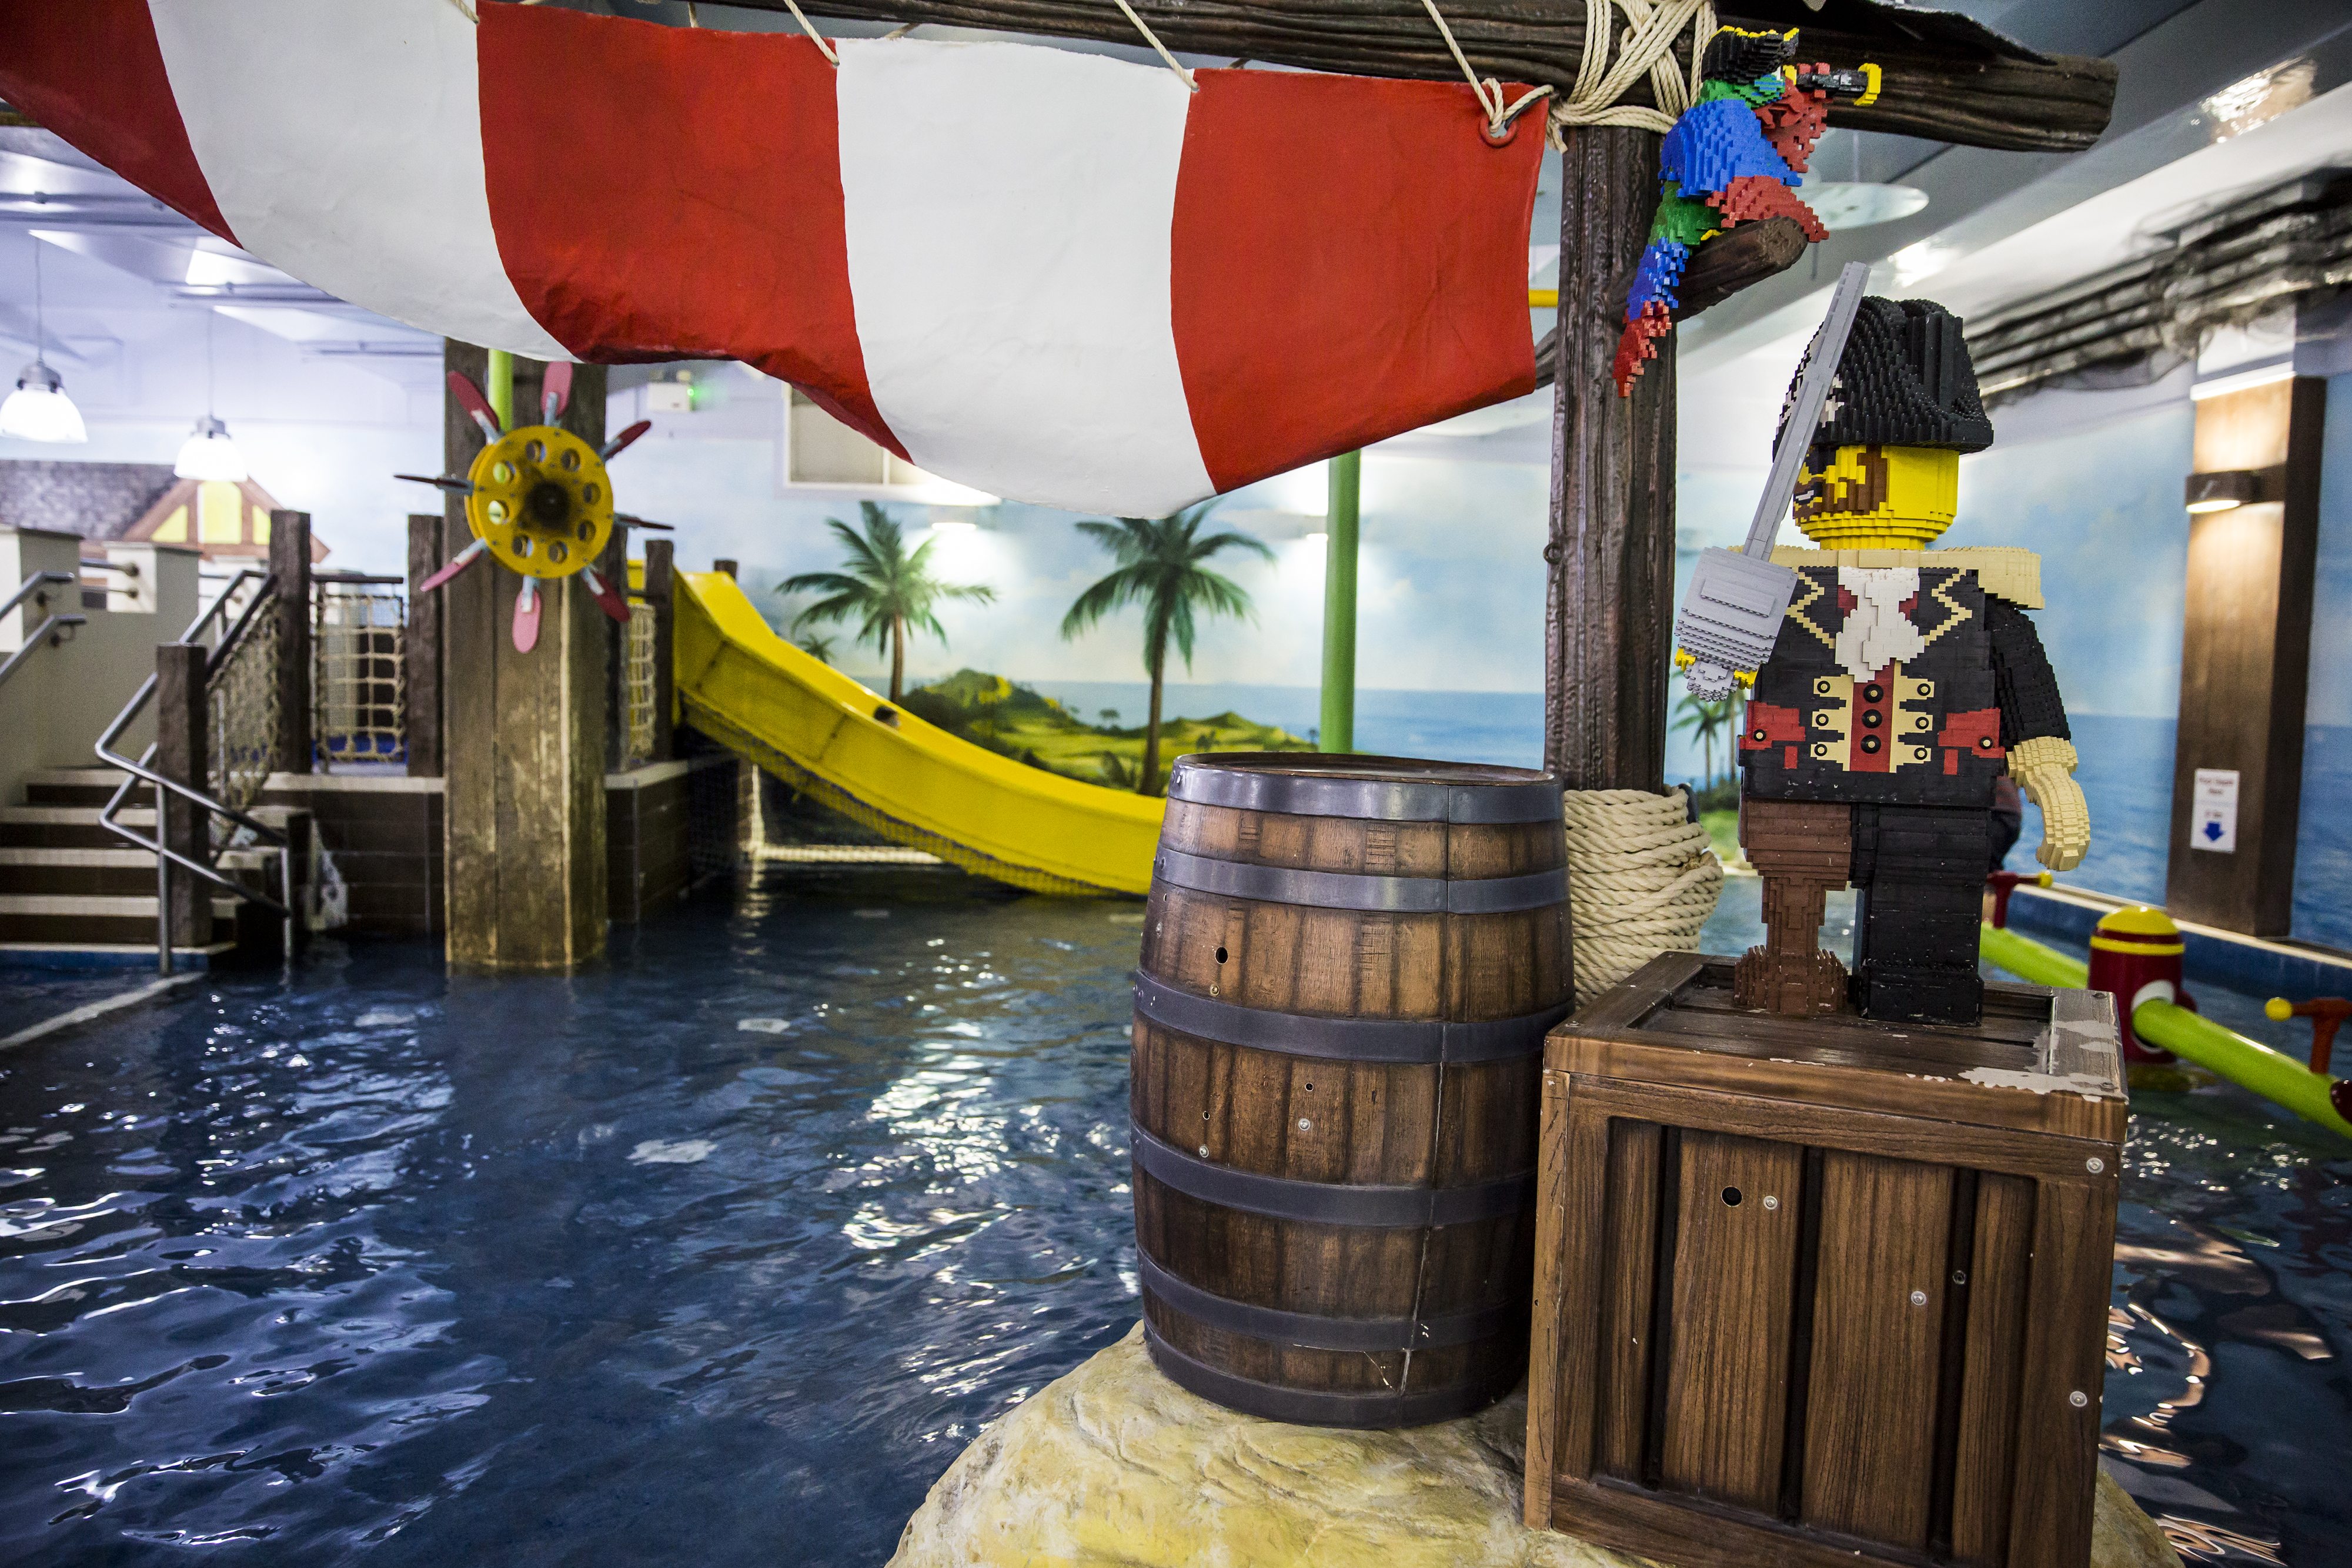 Pirate Themed Swimming Pool at the LEGOLAND Resort Hotel